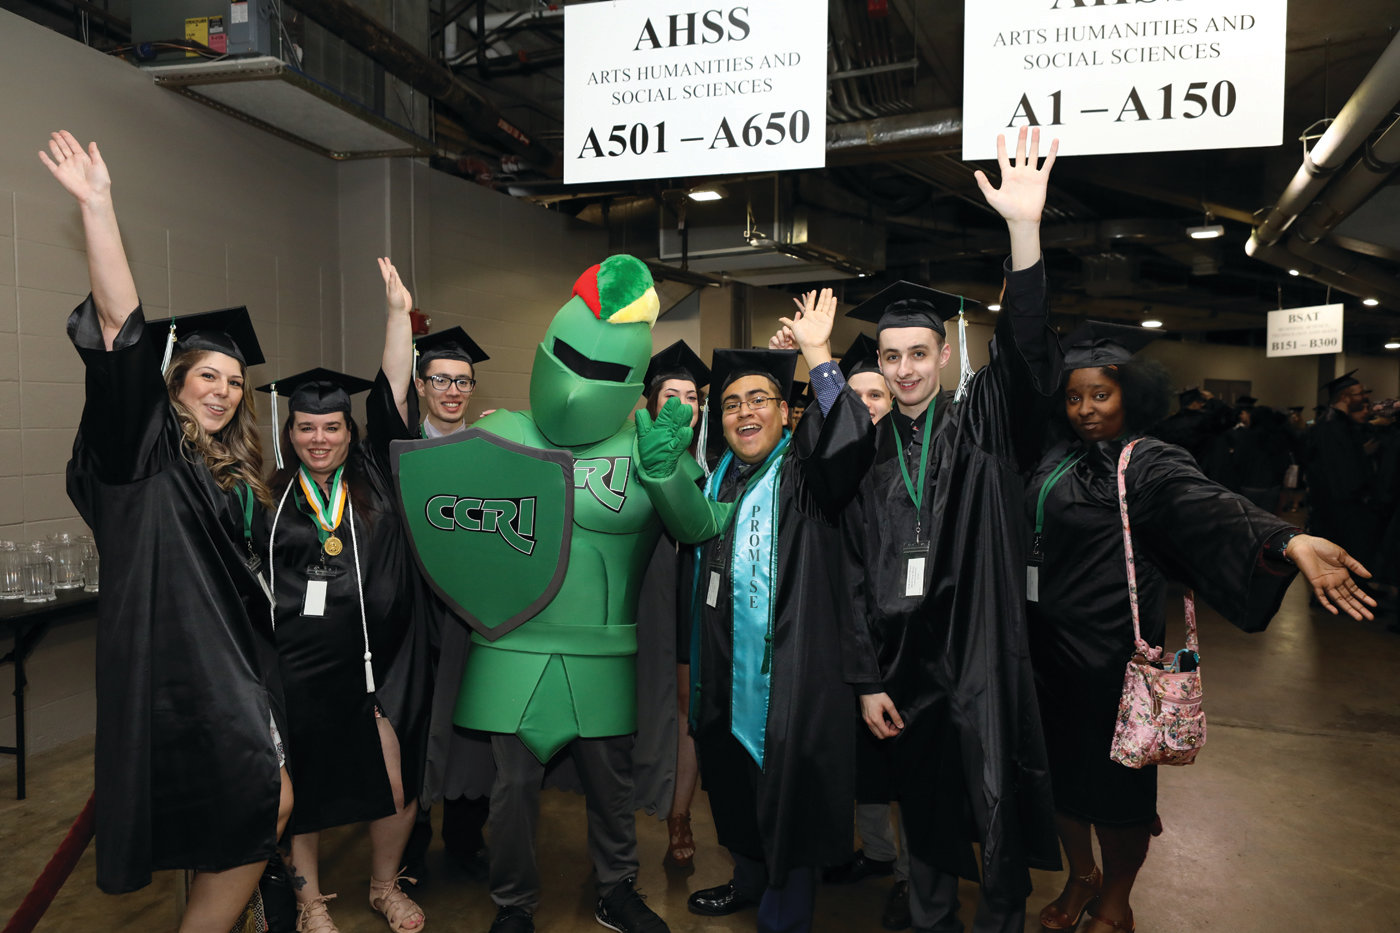 PROUD KNIGHTS: Members of CCRI’s graduating class share a moment with the school’s mascot ahead of the May 16 commencement ceremony at the Dunkin’ Donuts Center.